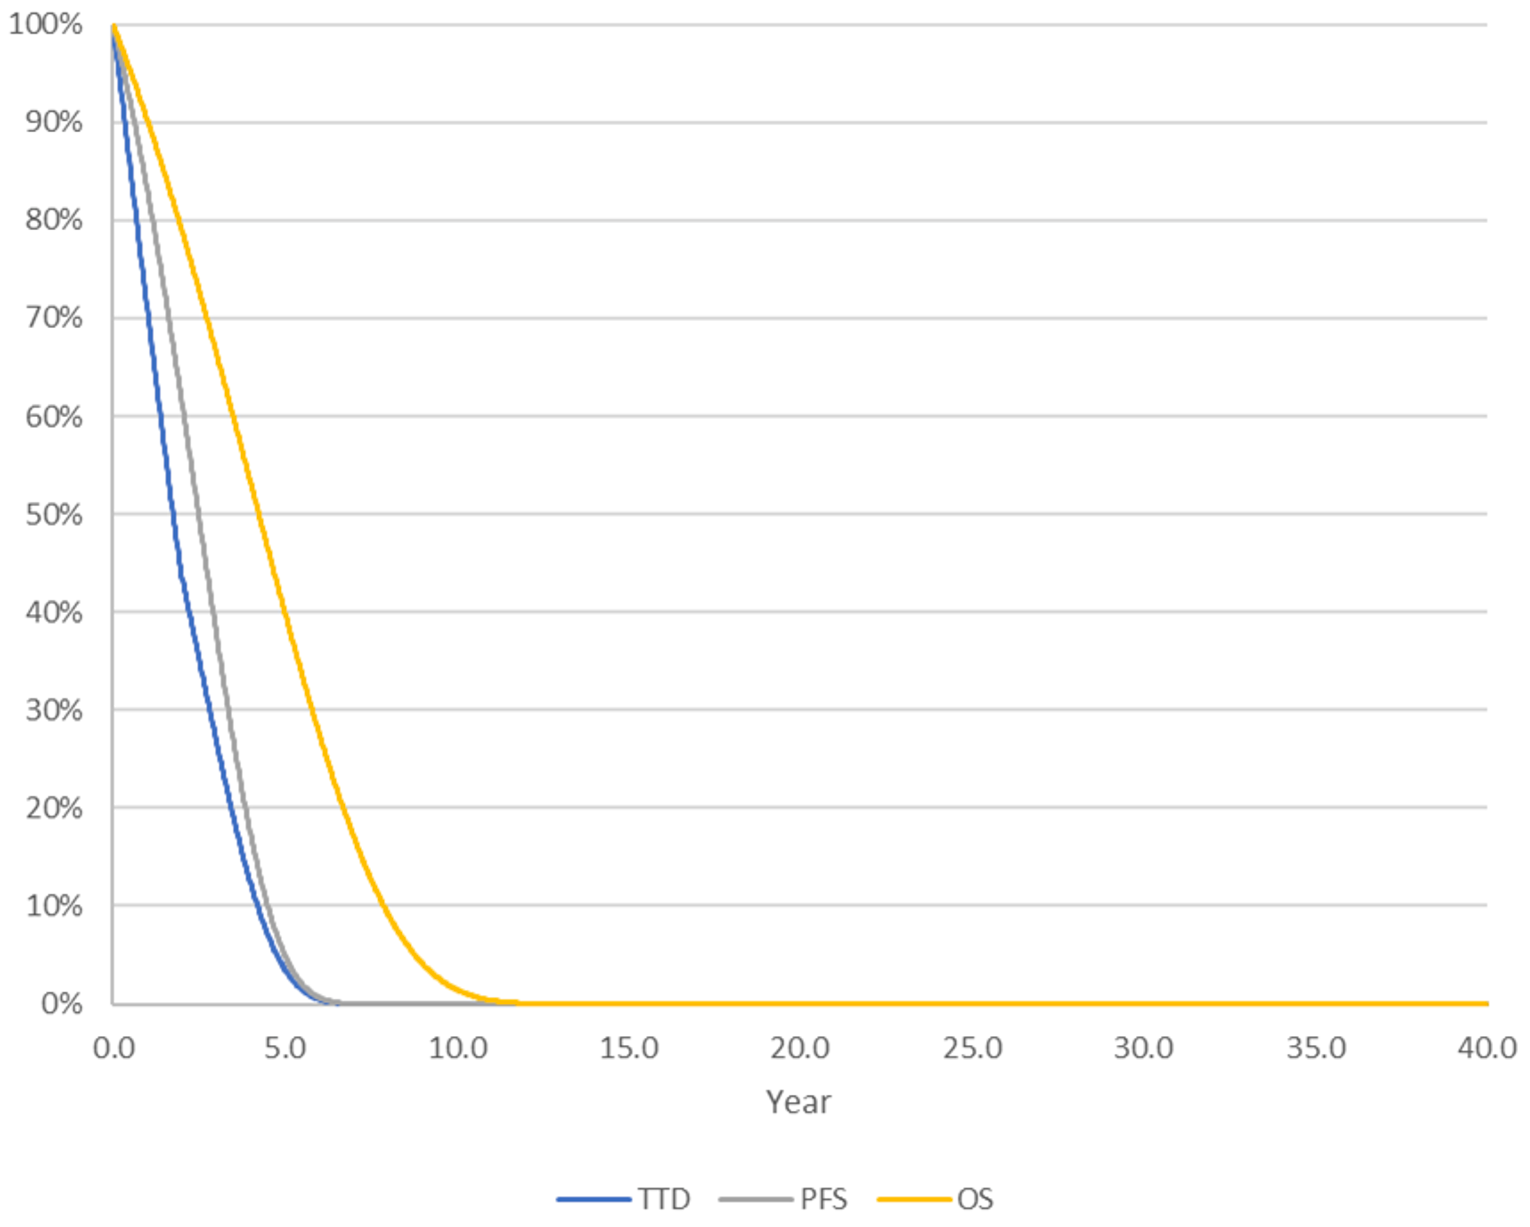 The figure outlines what proportion of the cohort who received IsaKd have either discontinued therapy, progressed, or died at a given point in time. The y-axis represents the proportion of patients, expressed as a percentage. The x-axis represents time, measured in years.